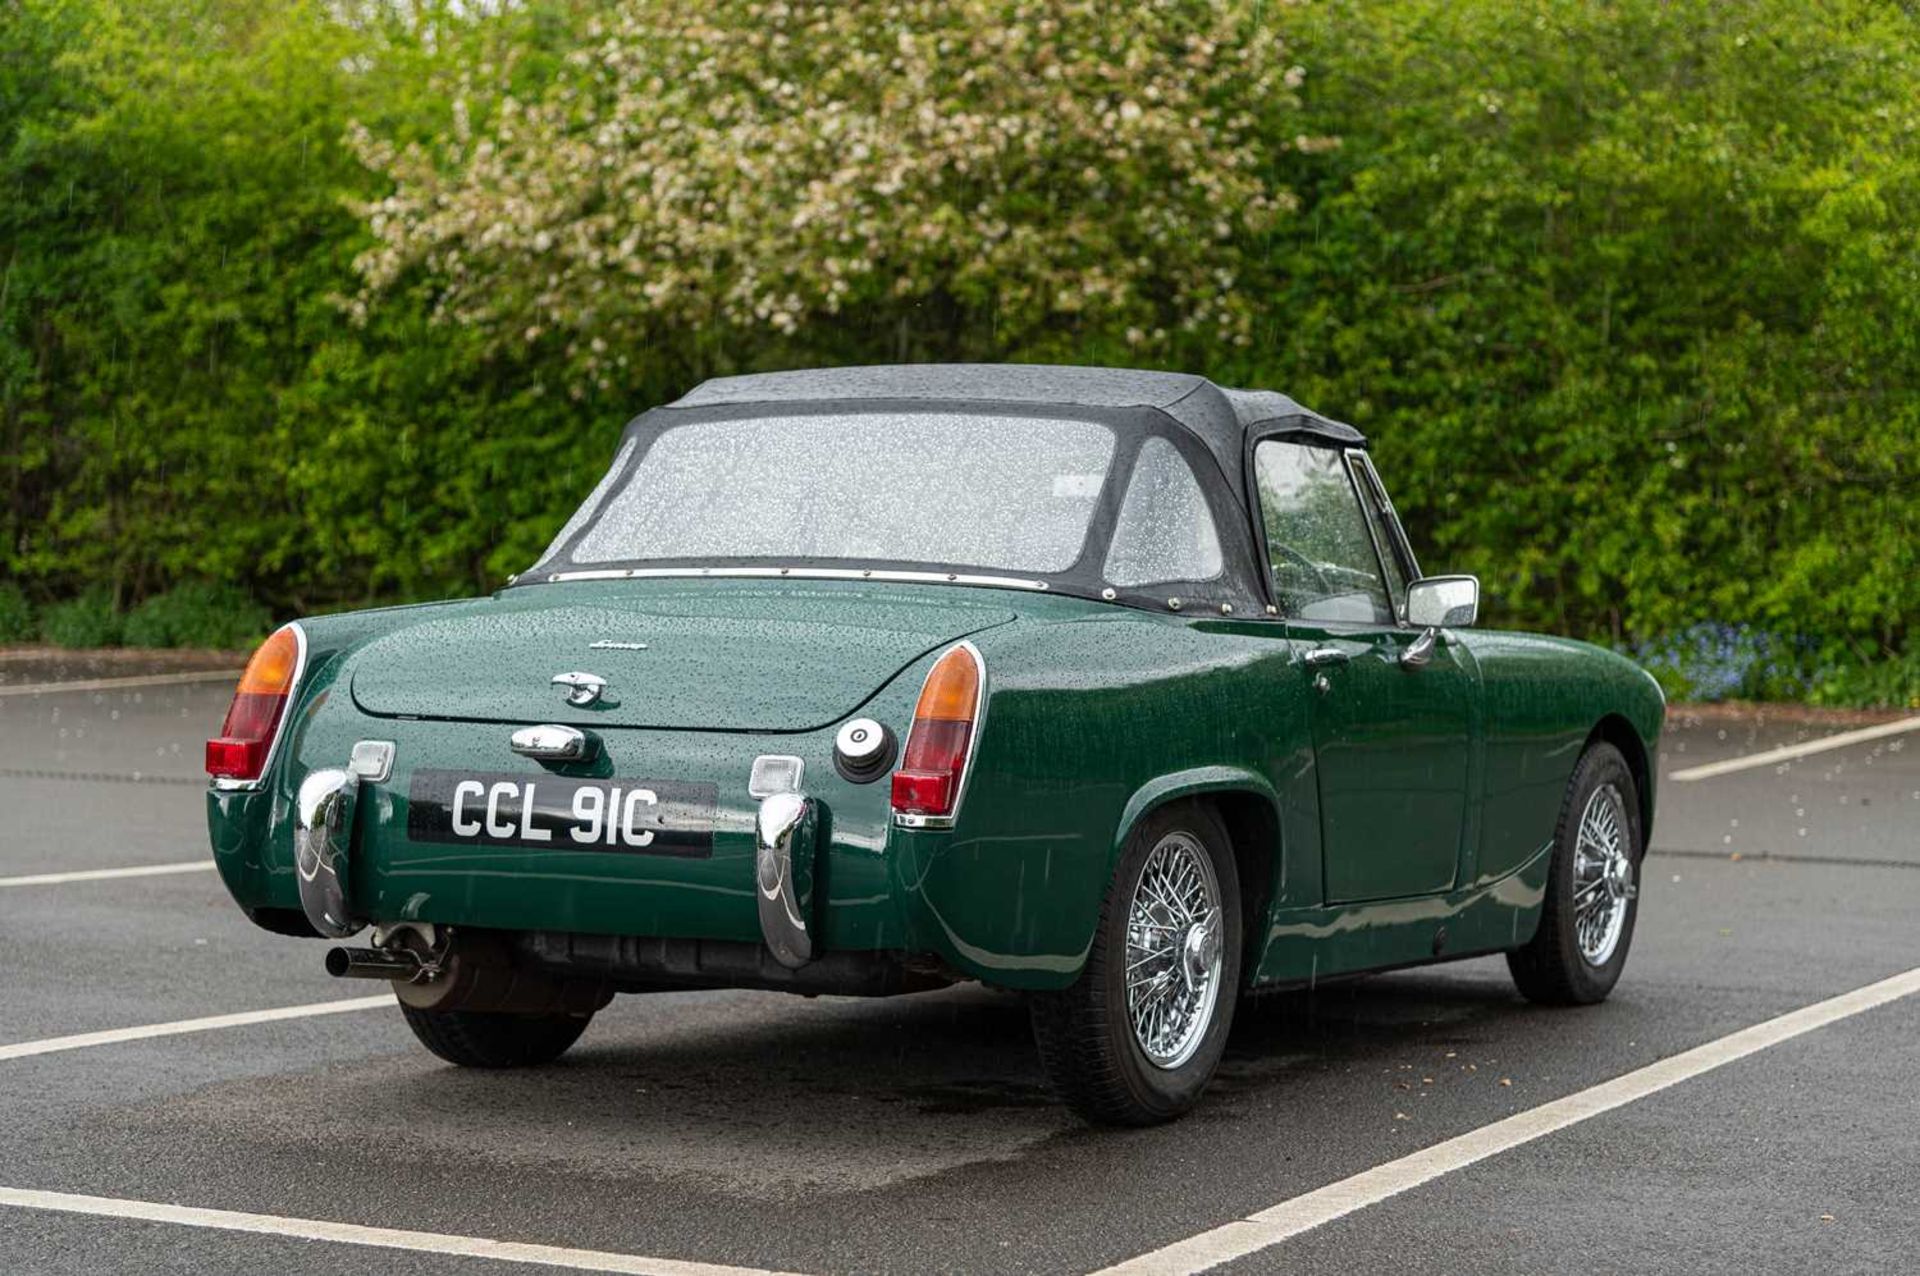 1965 Austin-Healey Sprite Formerly the property of British Formula One racing driver David Piper - Image 11 of 71